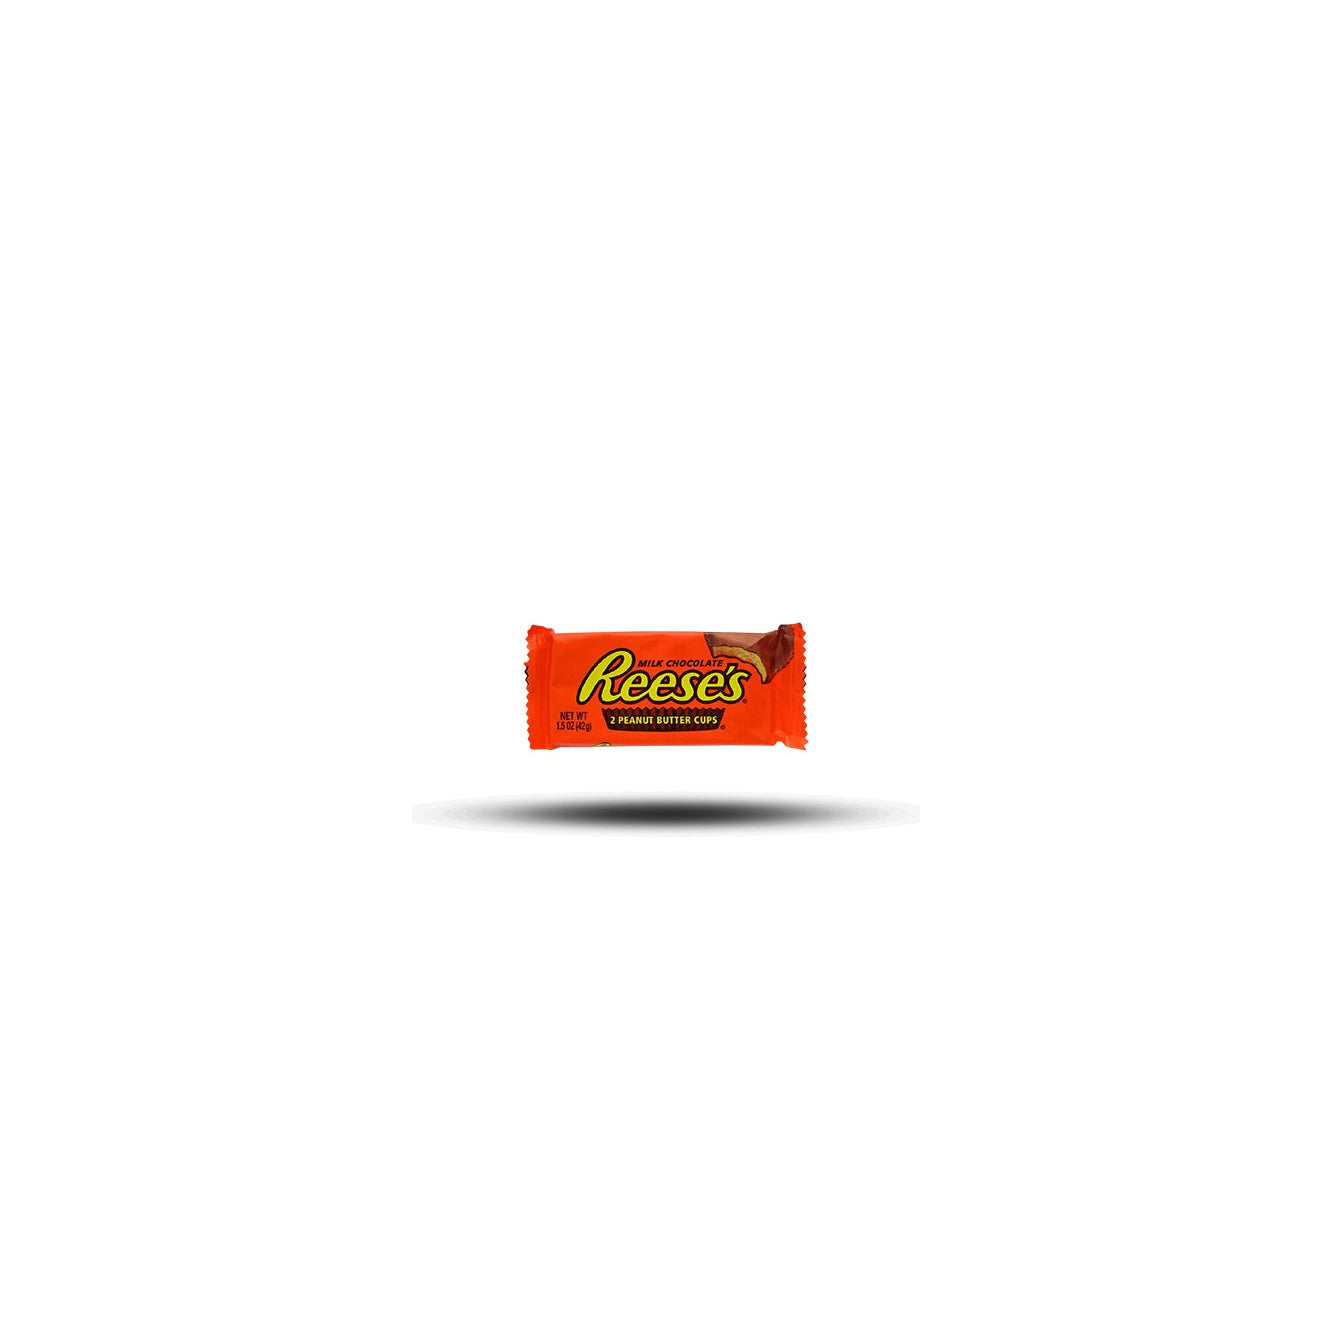 Reese´s 2 Peanut Butter Cups 42g-Hershey's-SNACK SHOP AUSTRIA